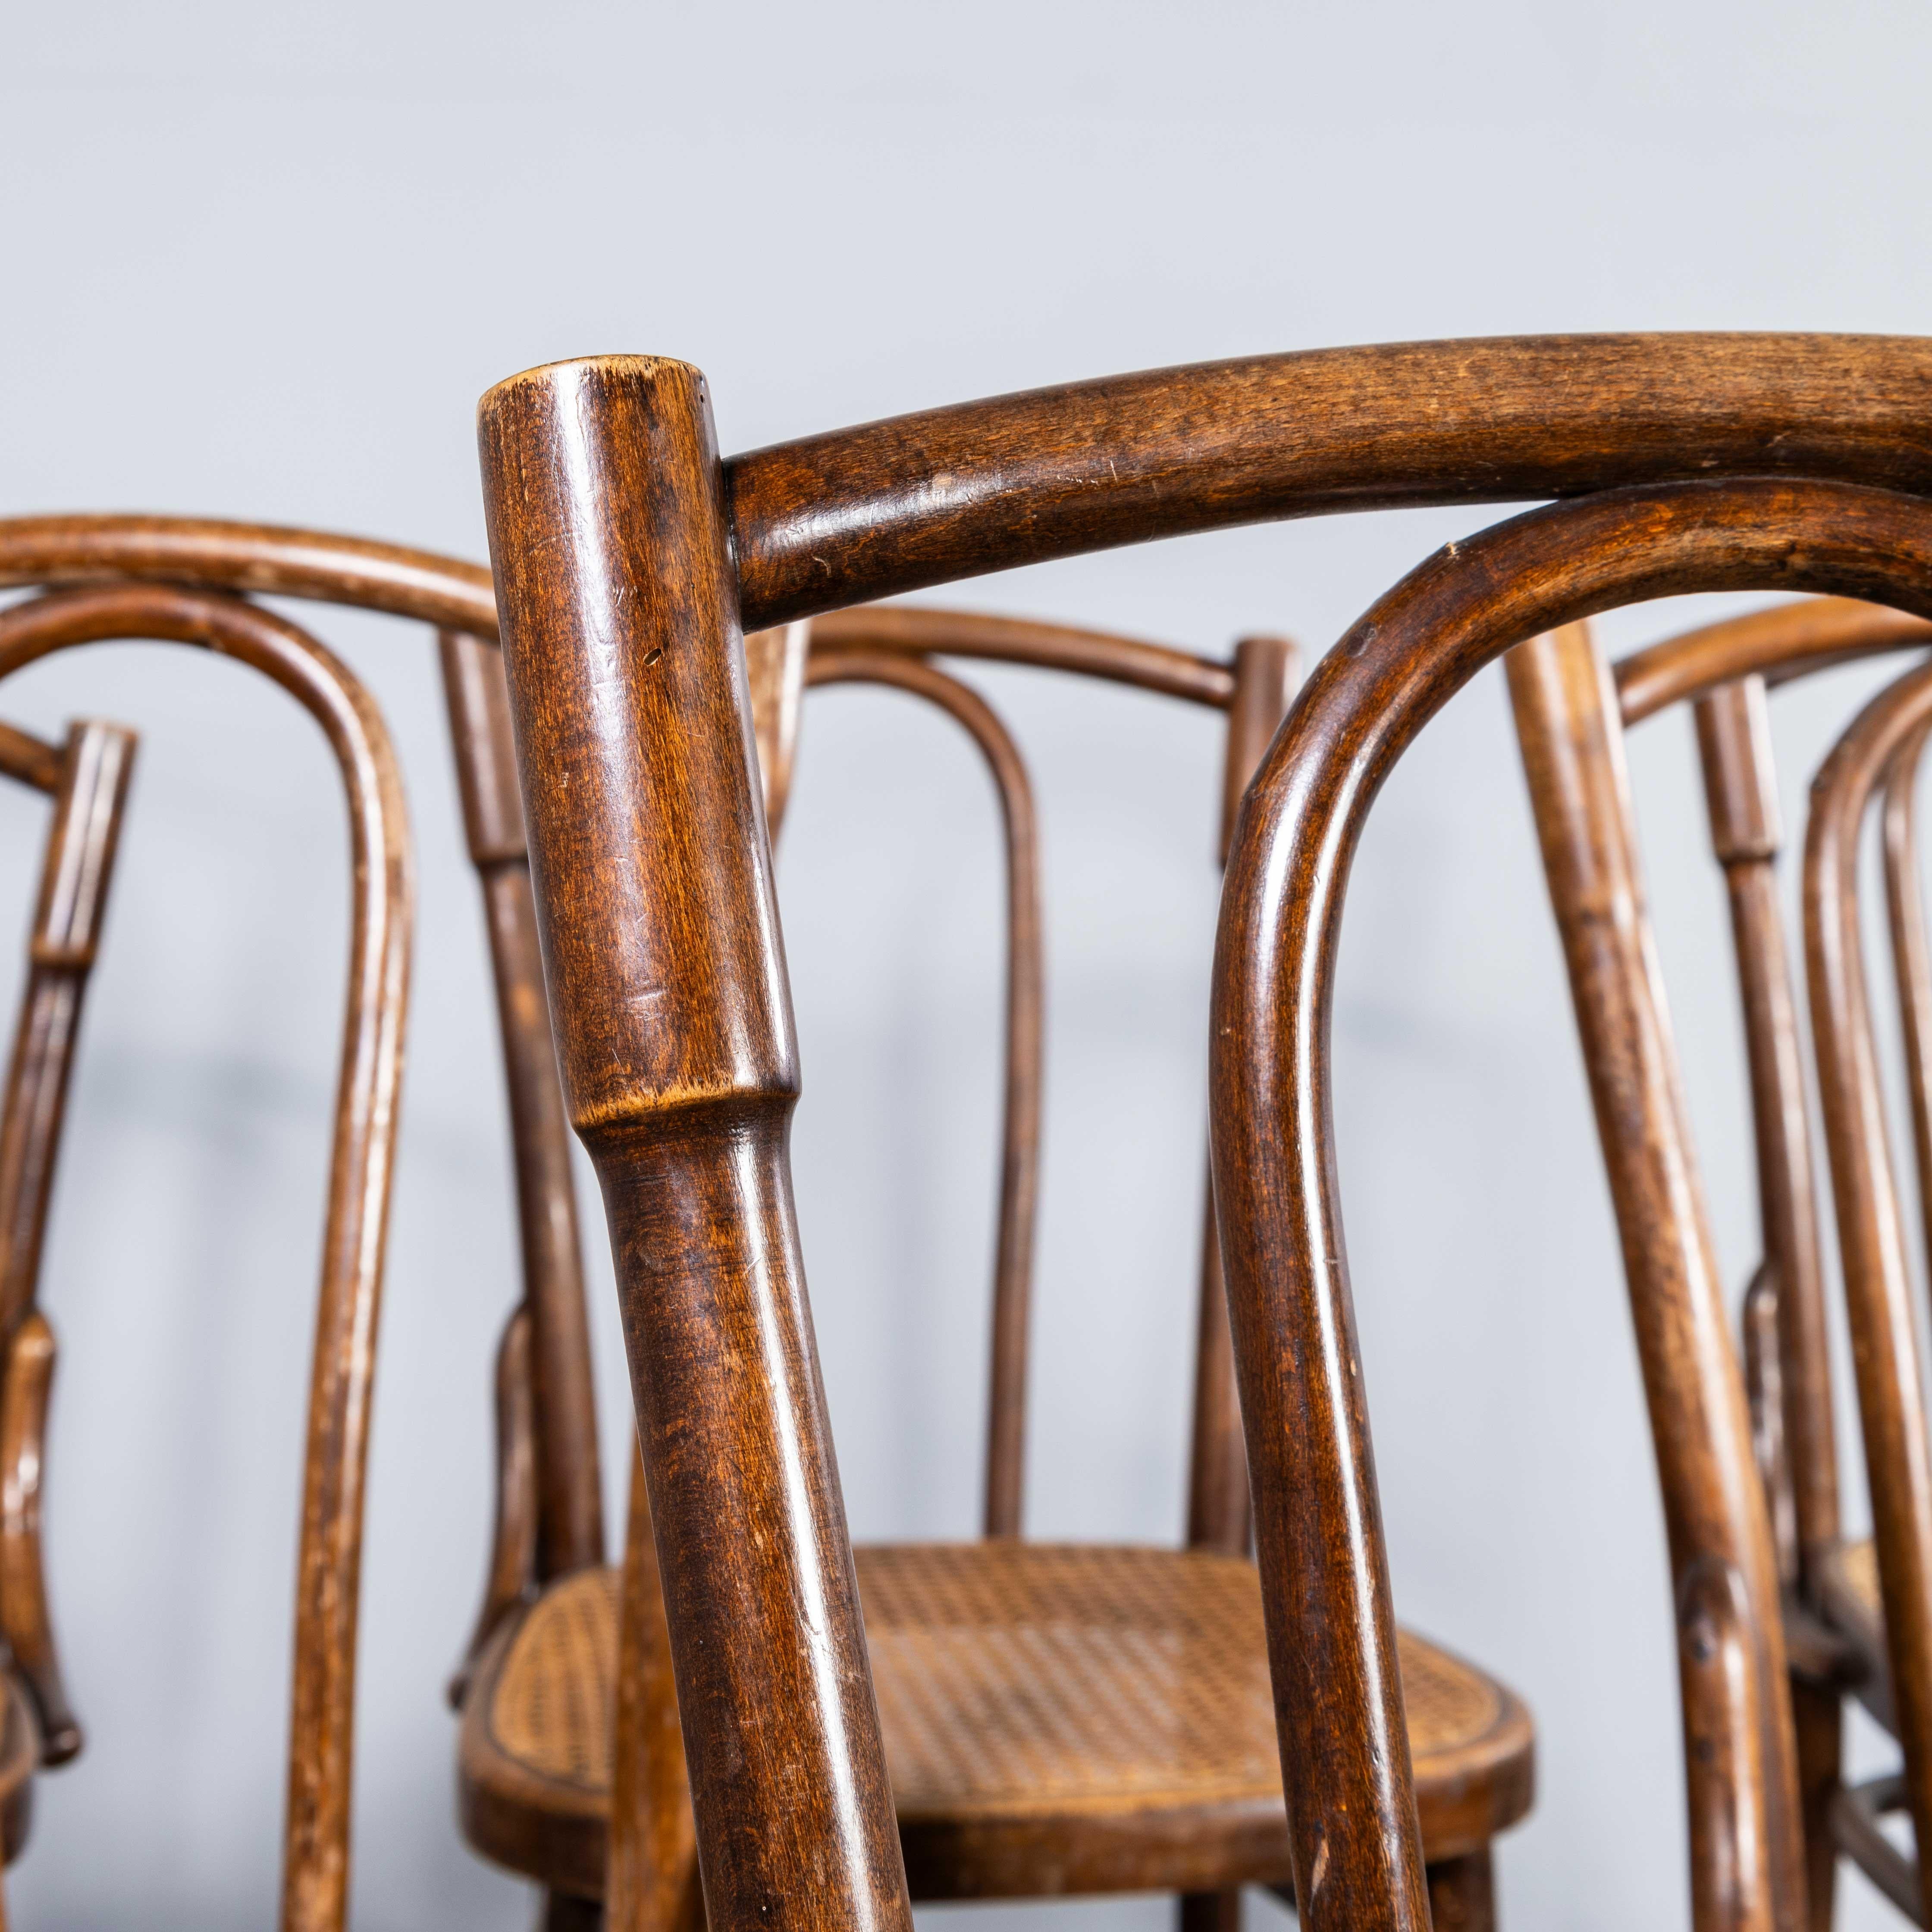 1940’s Thonet Original Single Hoop Bentwood Chairs – Set Of Six
1940’s Thonet Original Single Hoop Bentwood Chairs – Set Of Six. Founded in the early 19th Century by Michael Thonet, Thonet invented the process of steam bending wood under pressure